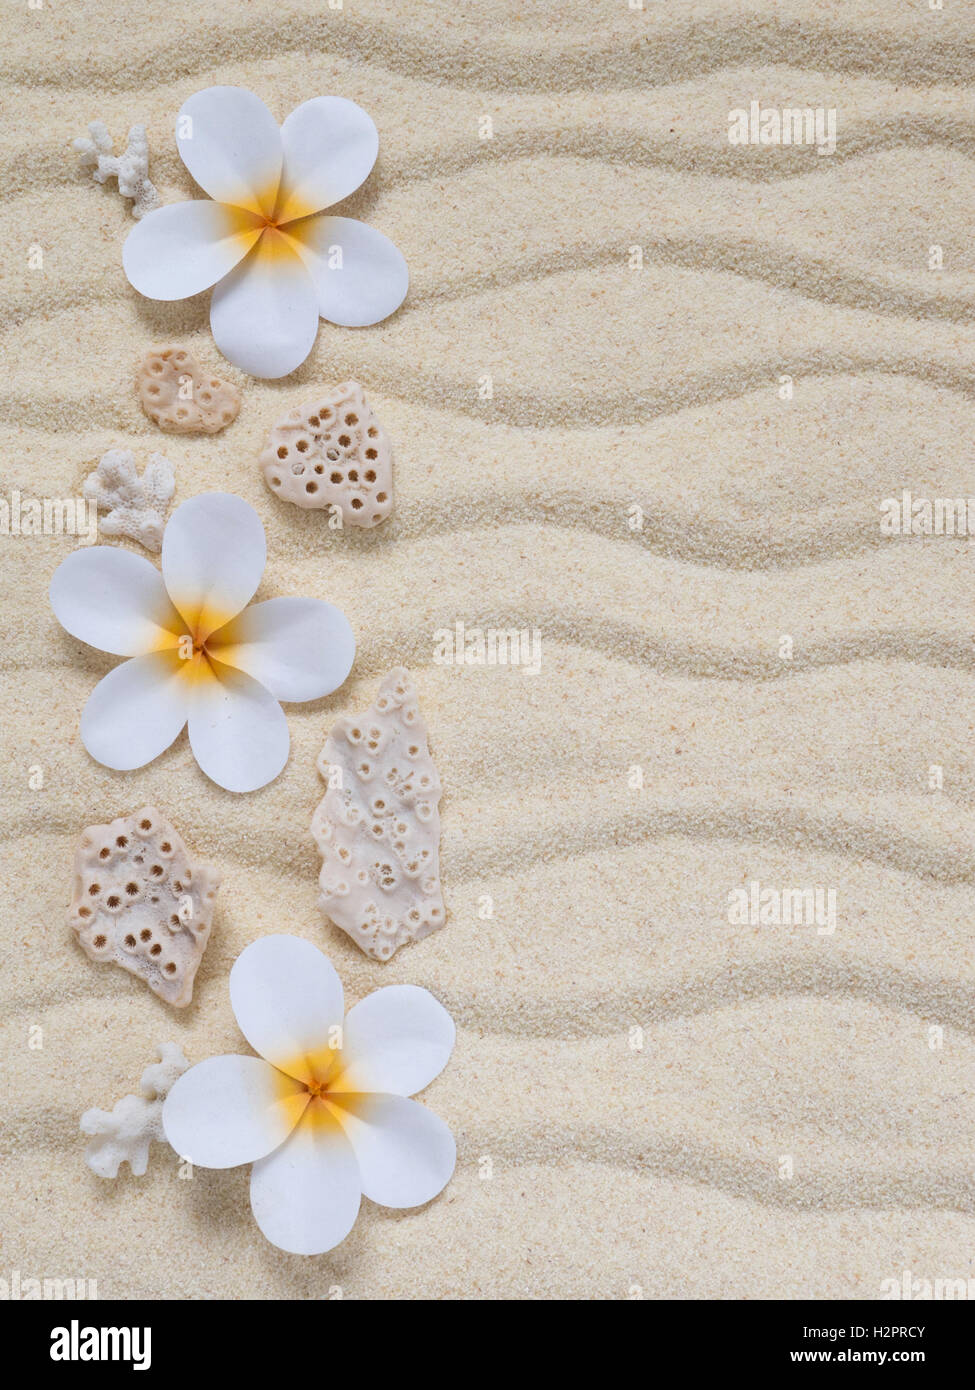 Tiare flowers and corals on the sand Stock Photo